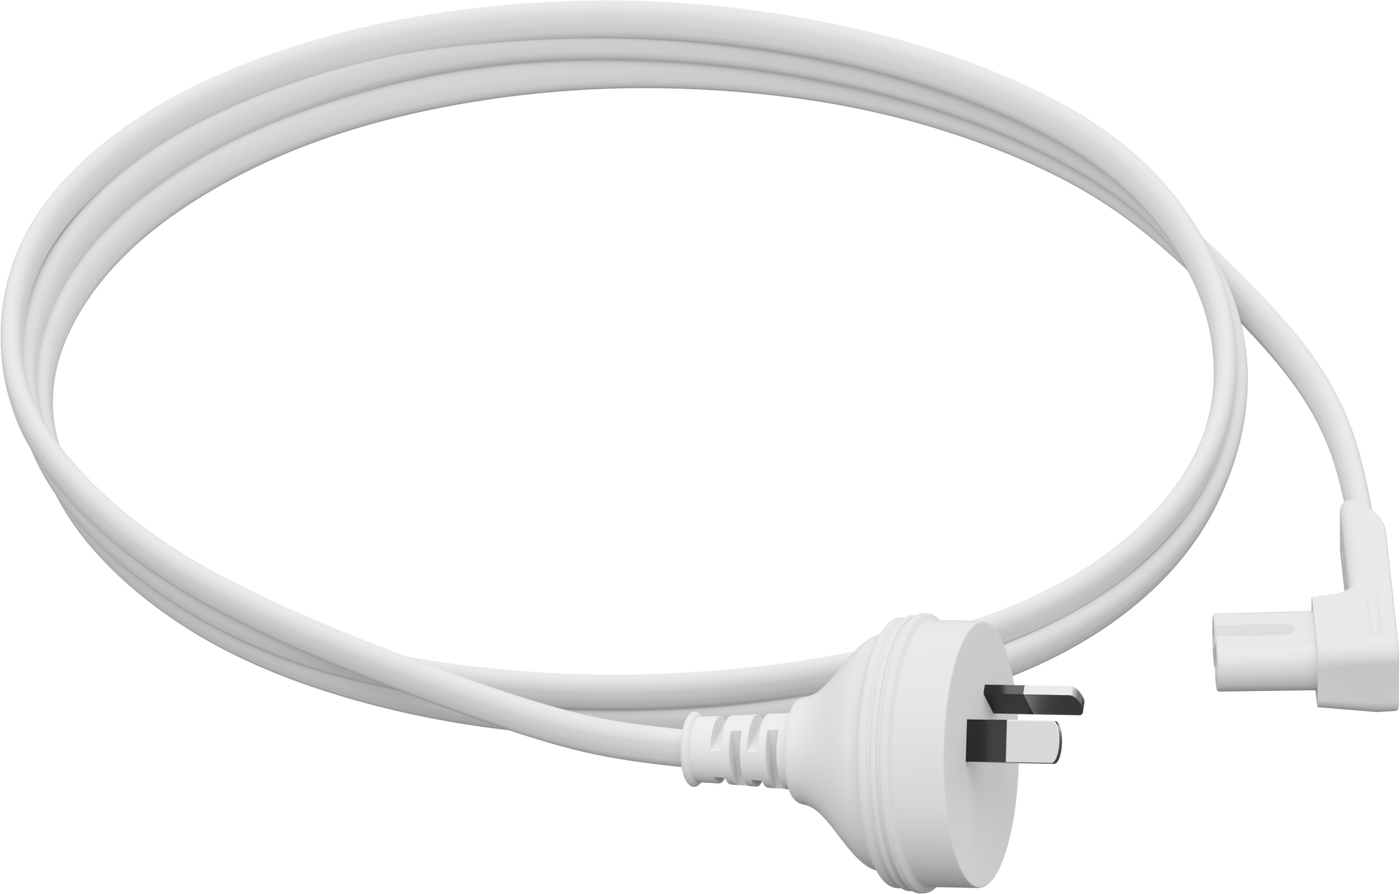 Sonos Angled Power Cable